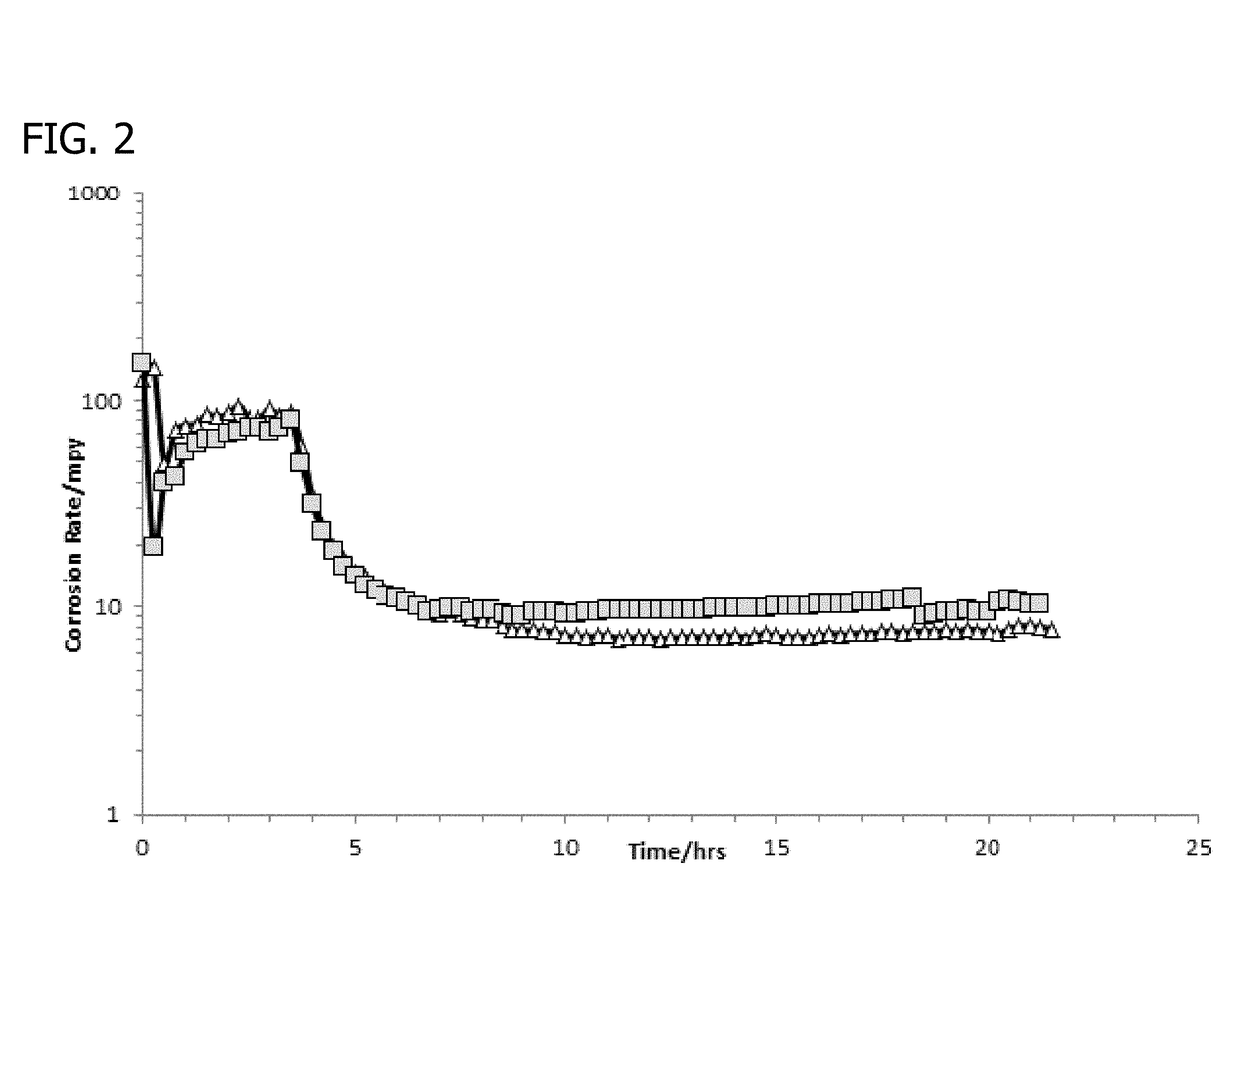 Composition for remediating iron sulfide in oilfield production systems